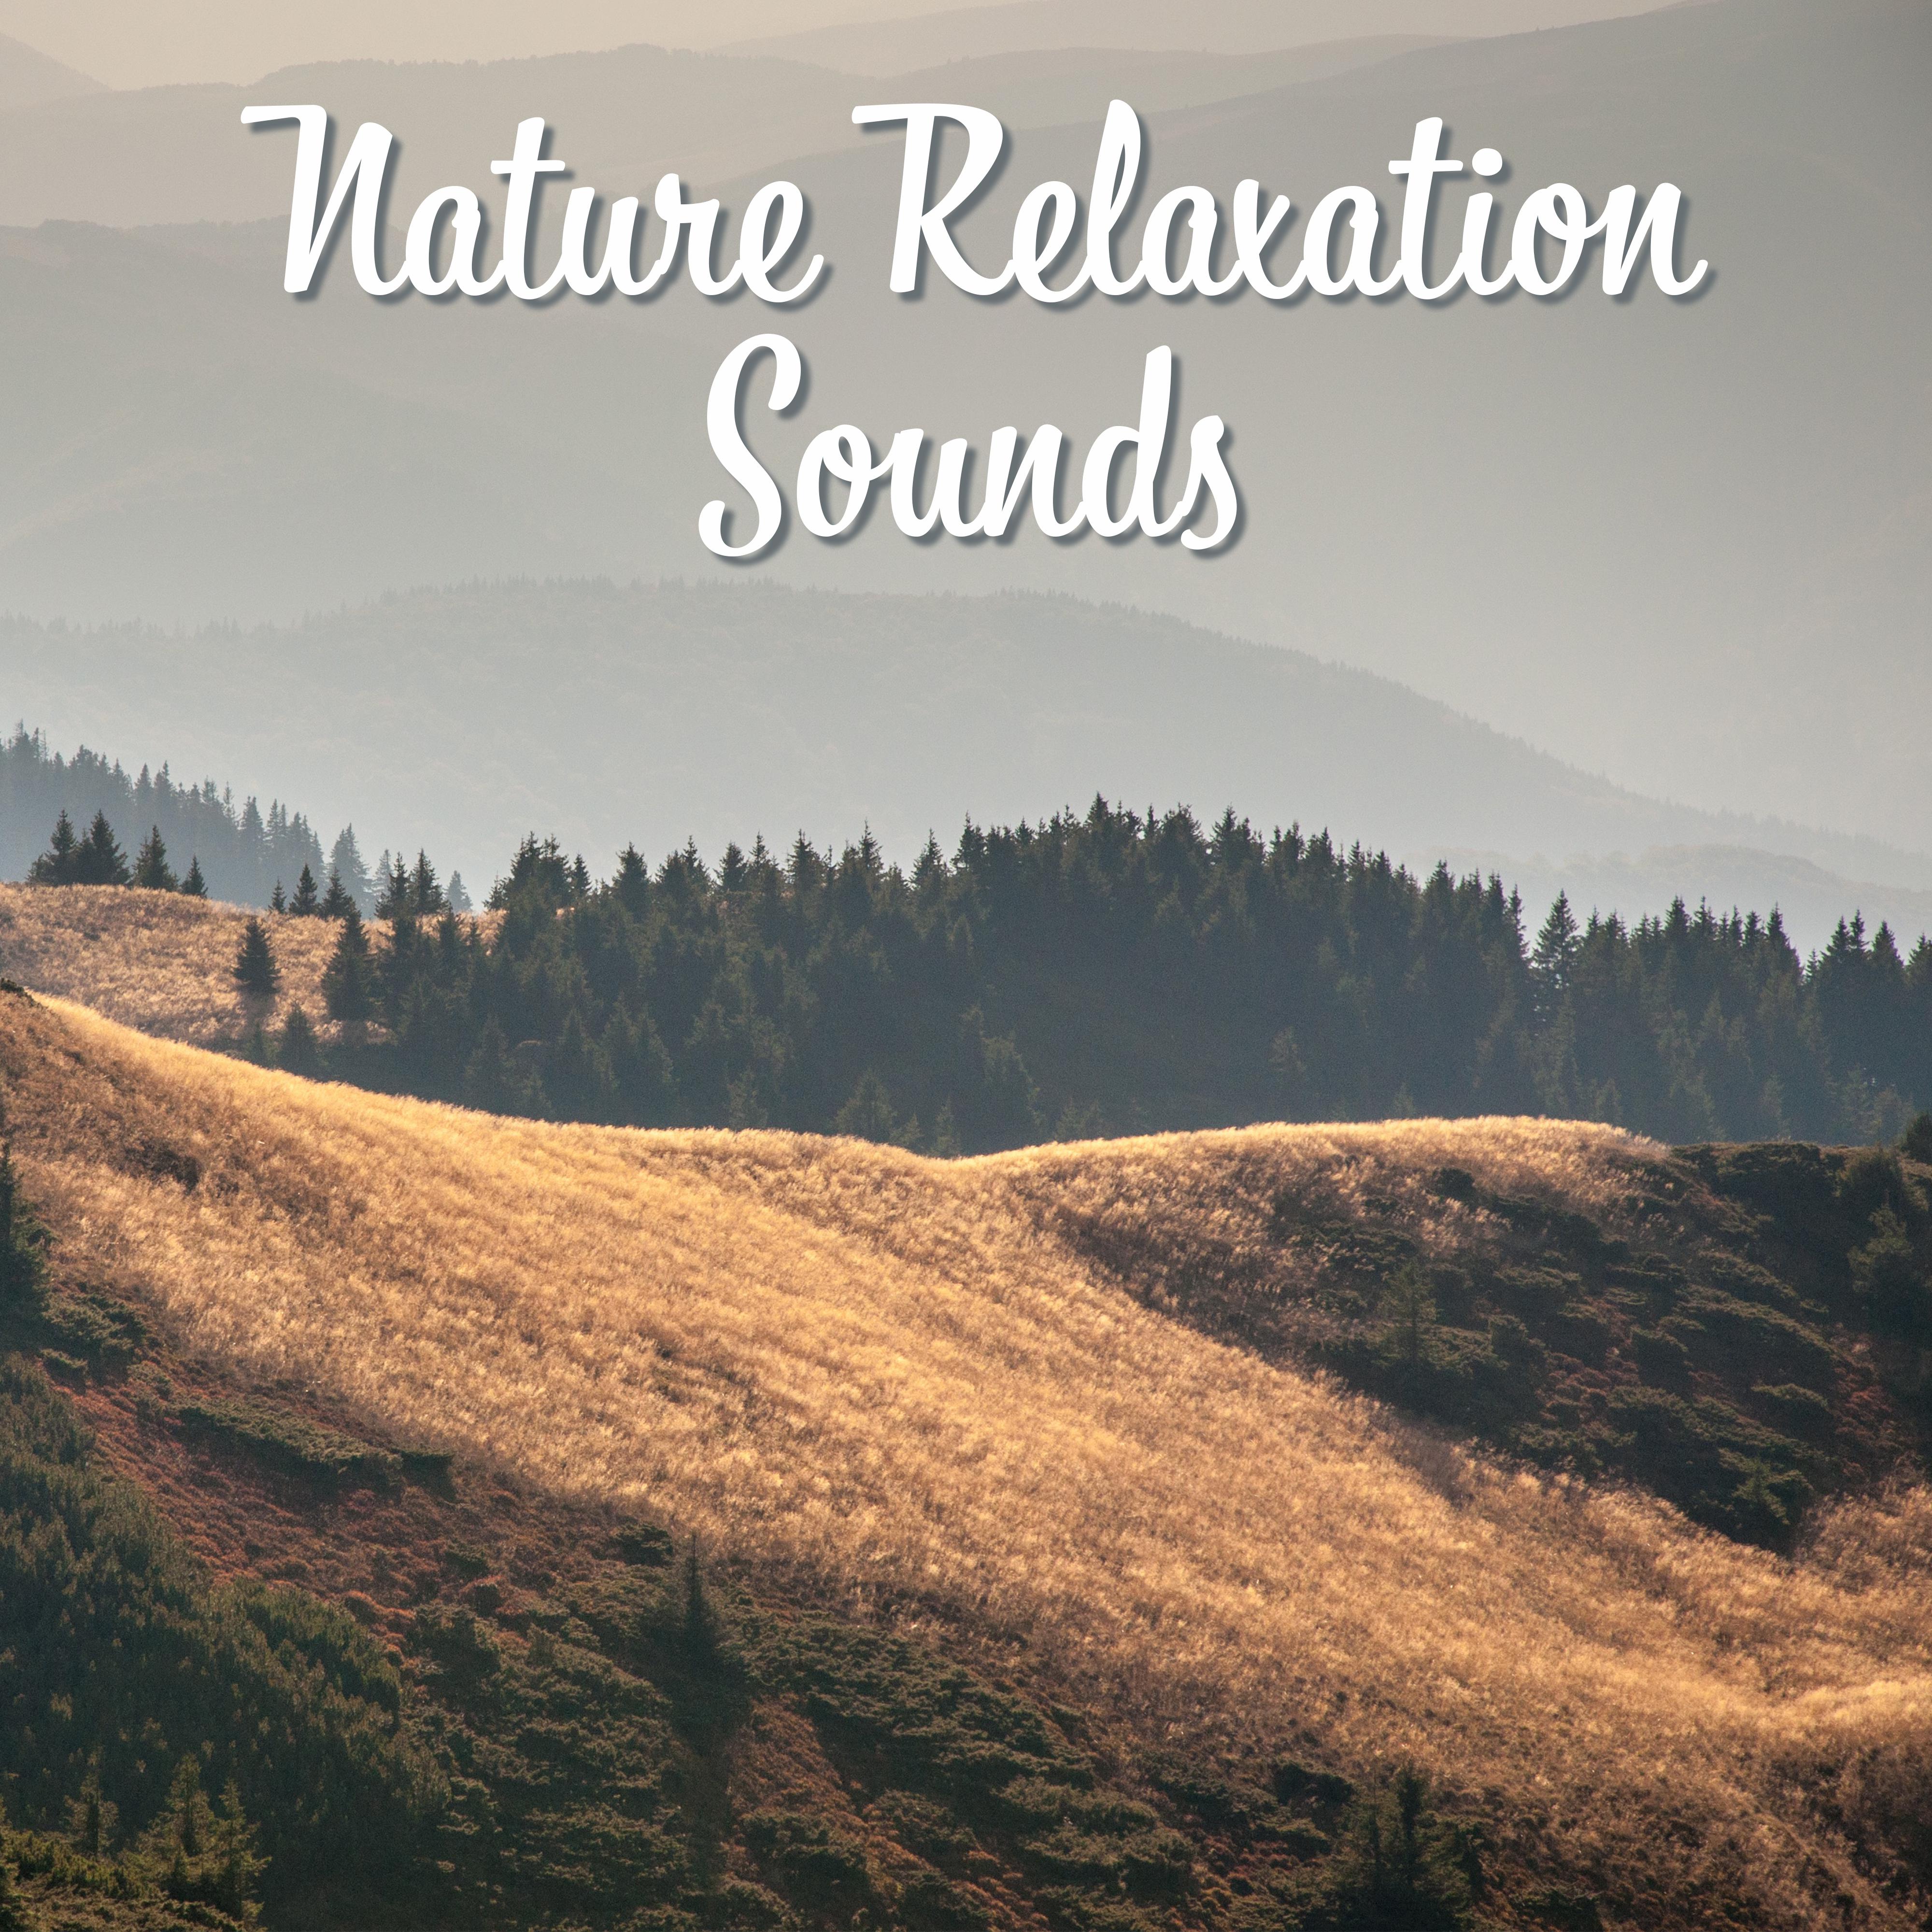 Nature Relaxation Sounds – Soothing New Age Music, Forest Waves, Calm Mind, Rest & Relax